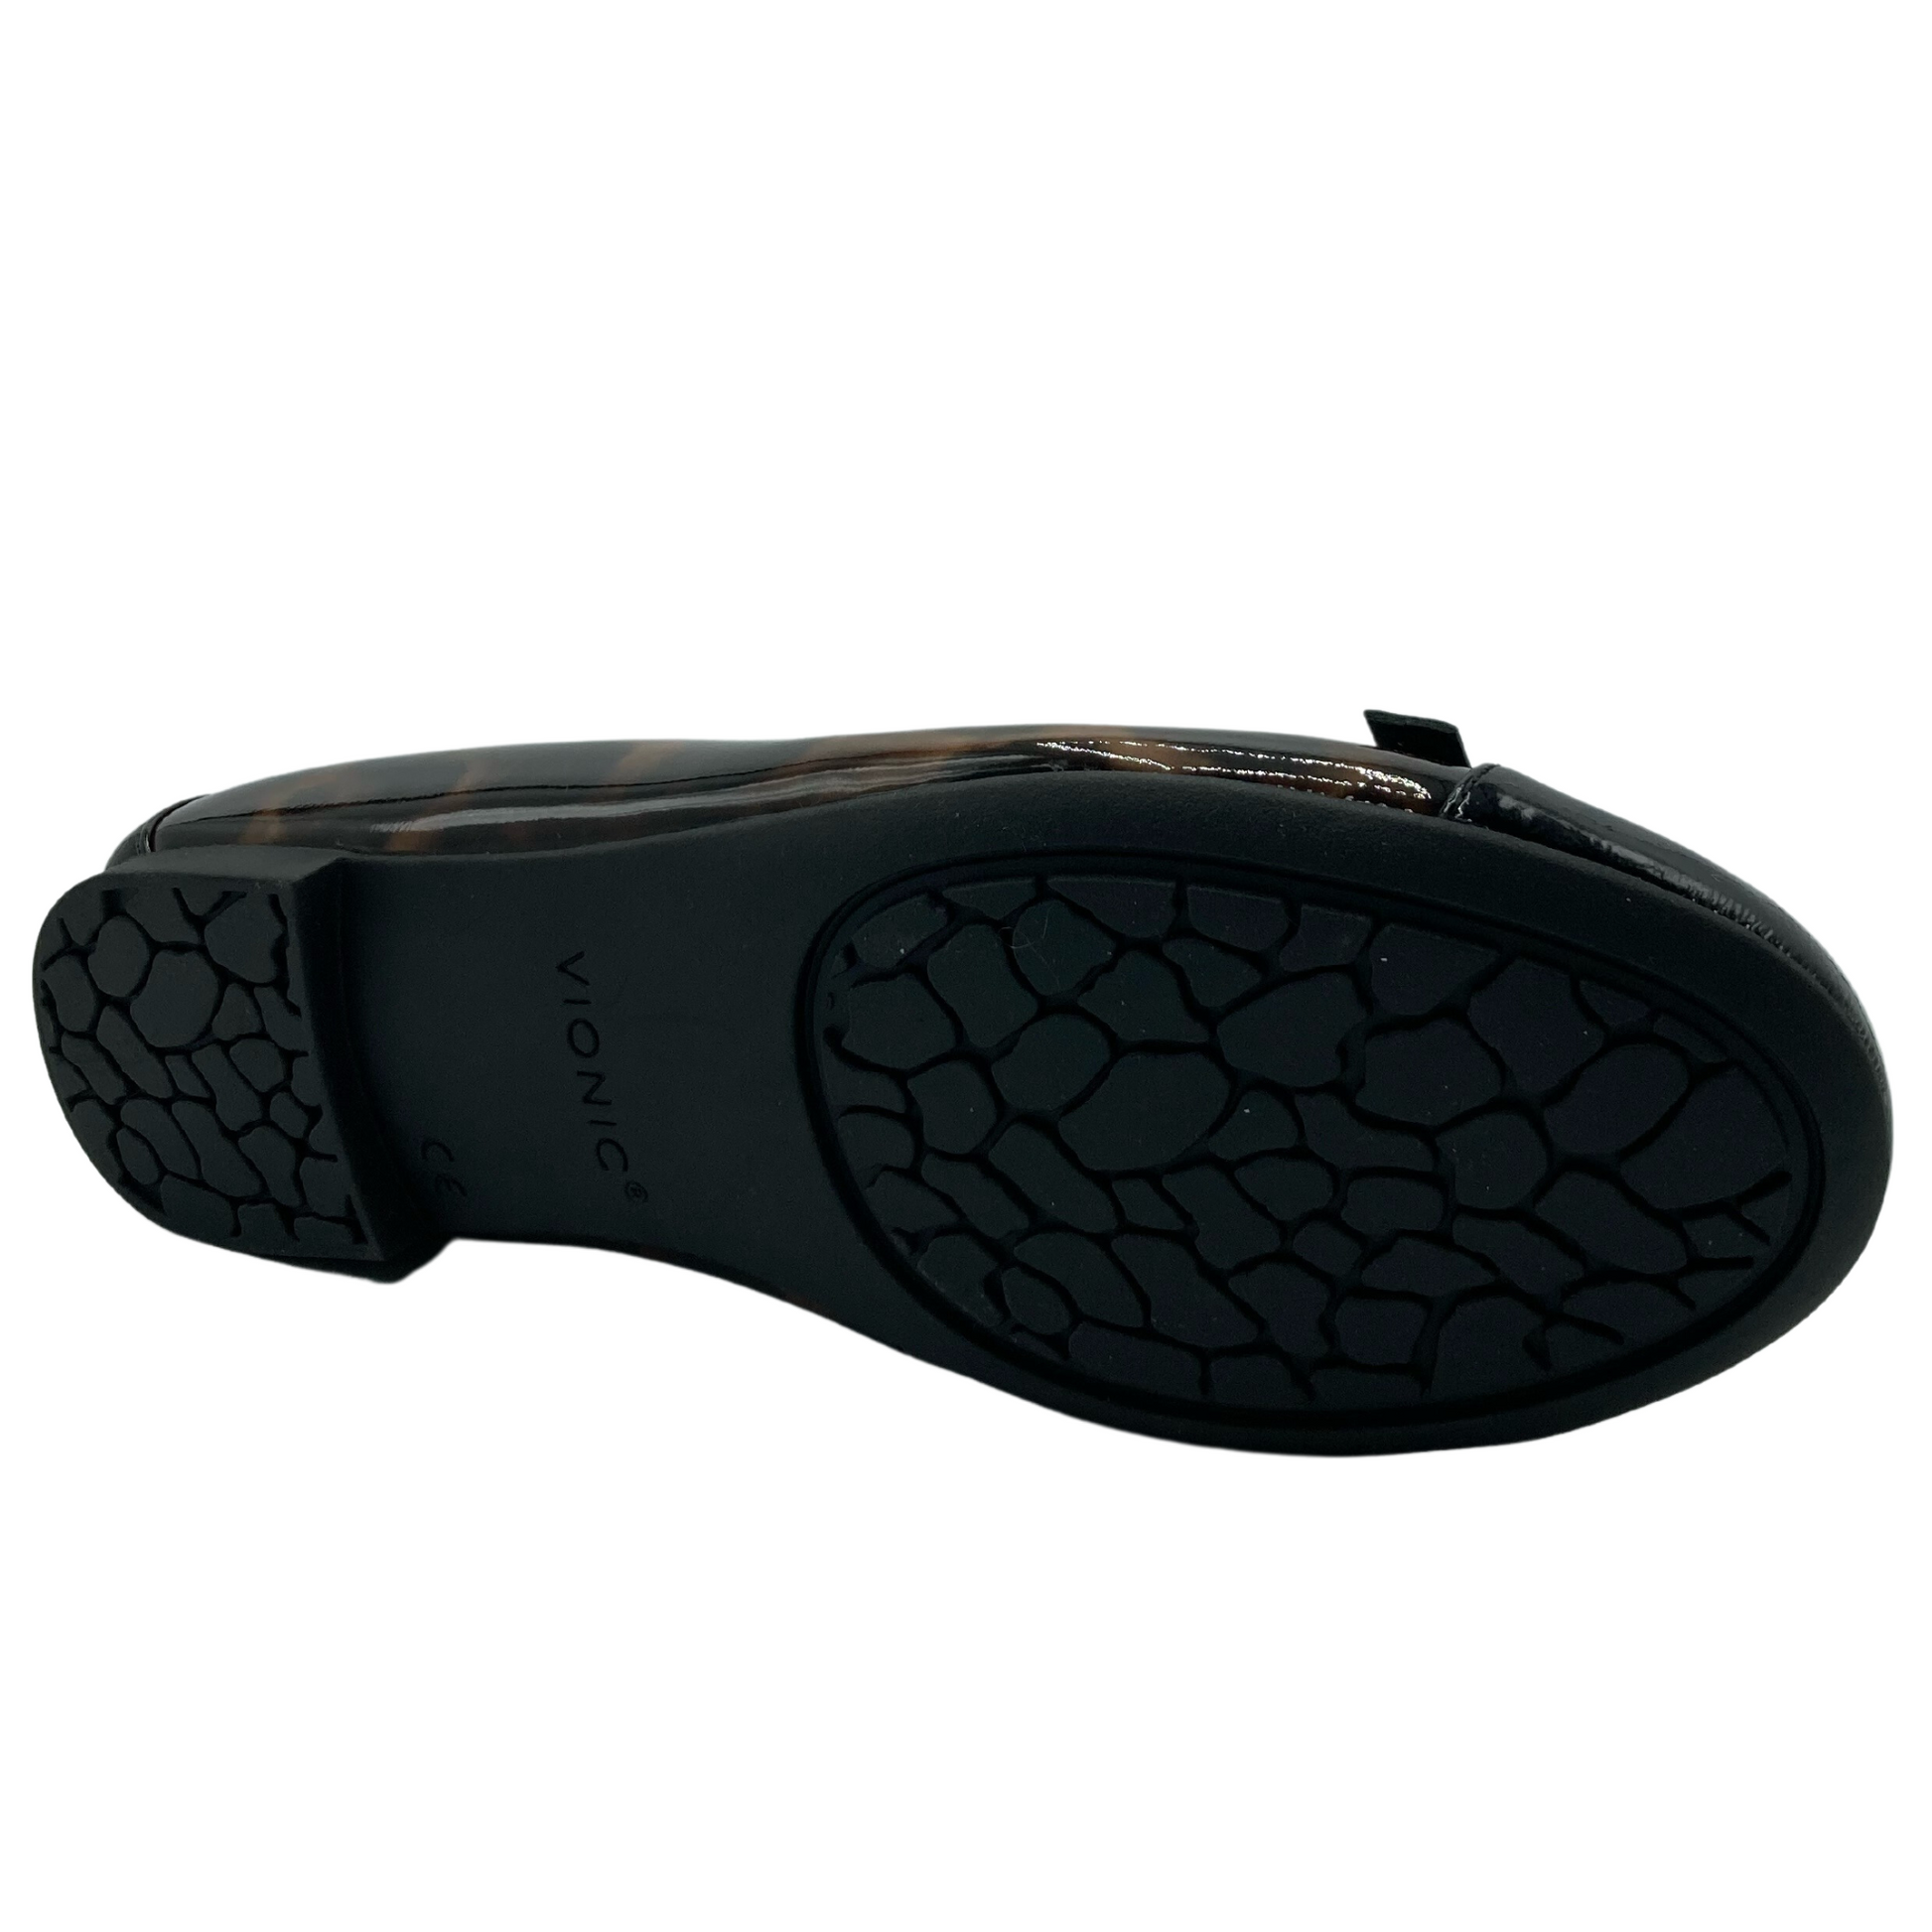 Bottom view of black and leopard print ballet flat with black rubber sole